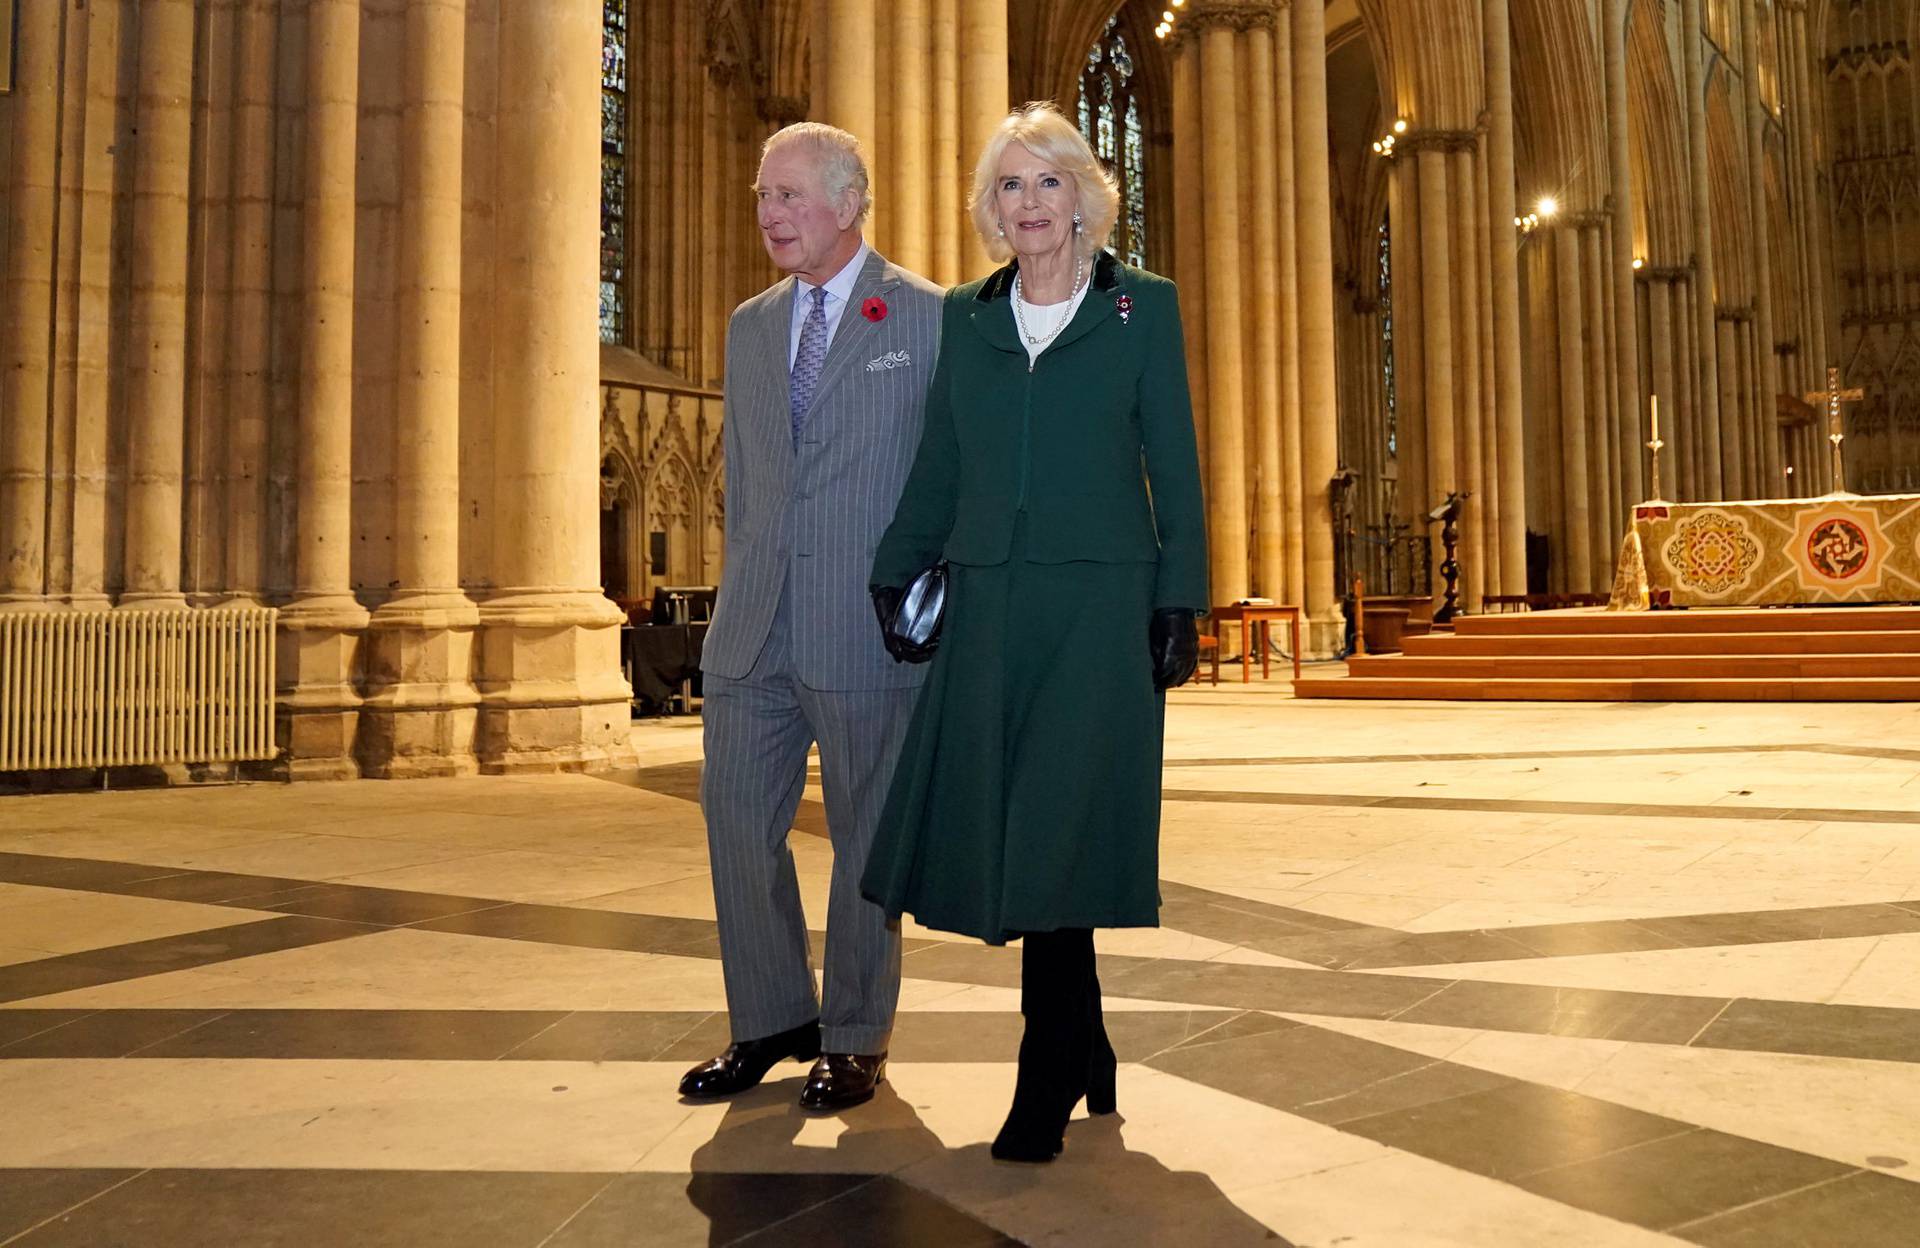 King Charles III and the Queen Consort visit York Minster